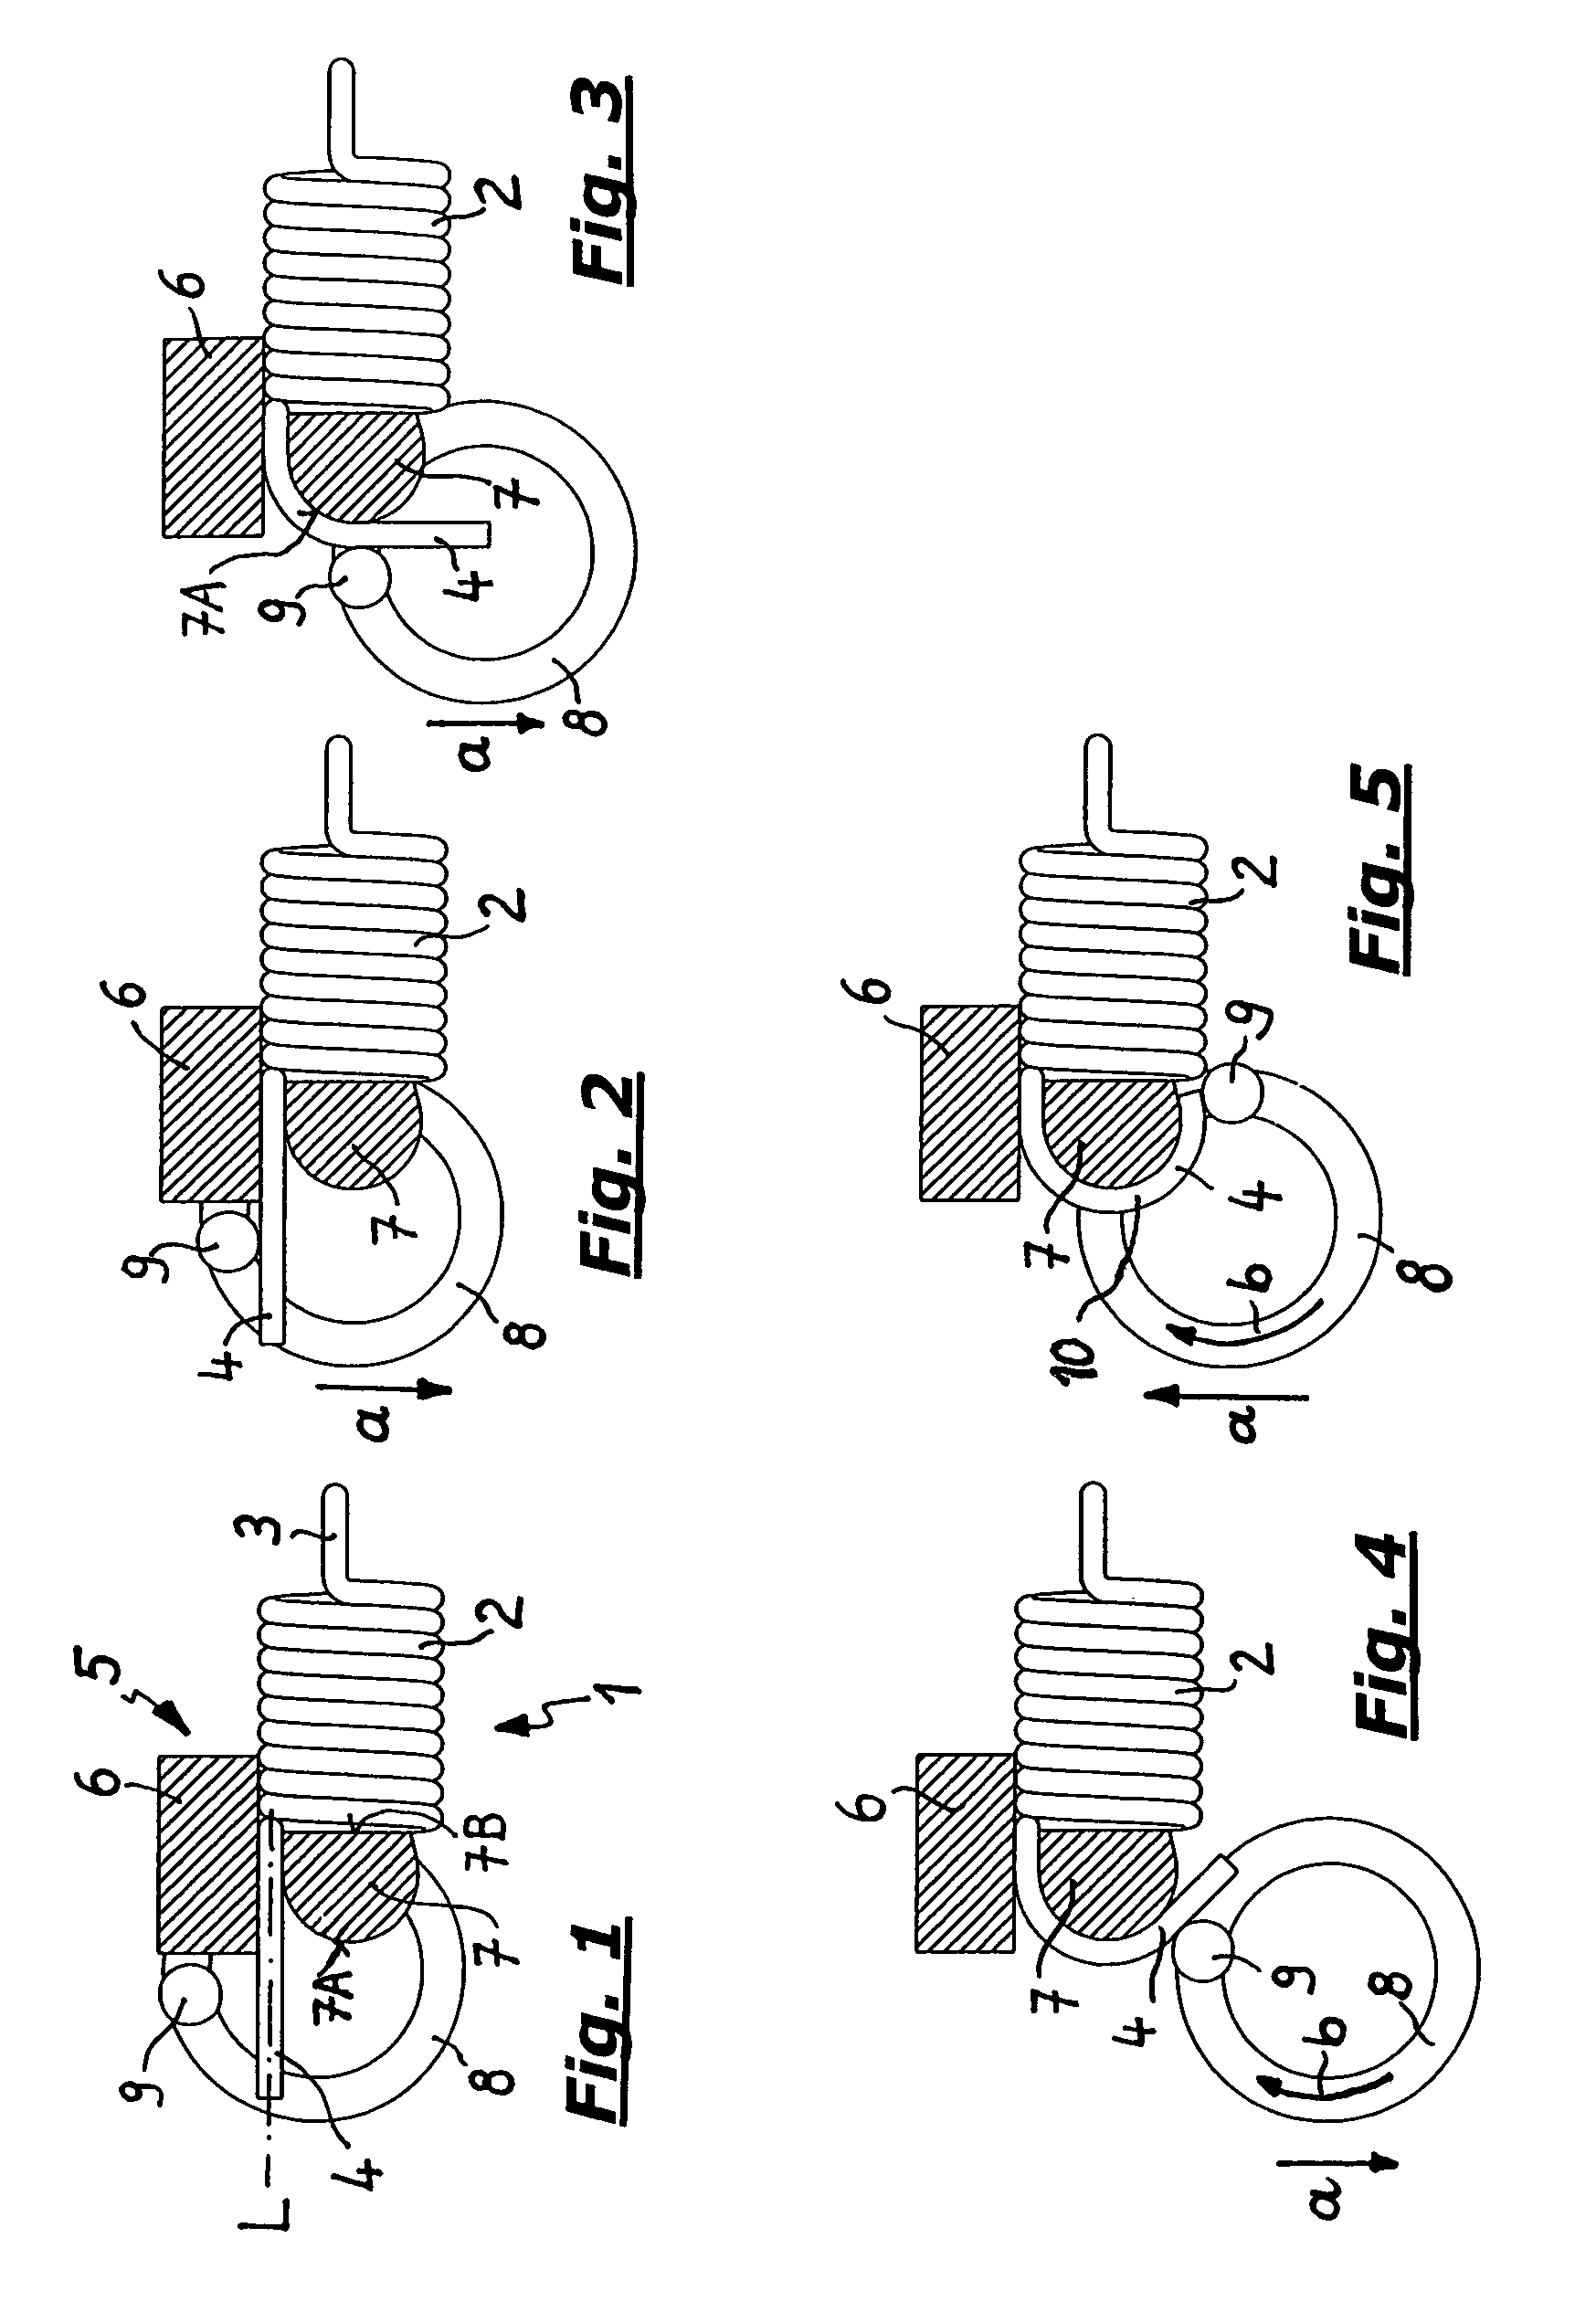 Method for producing an end lug of a spring member formed of a strand of wire, and apparatus for manufacturing same